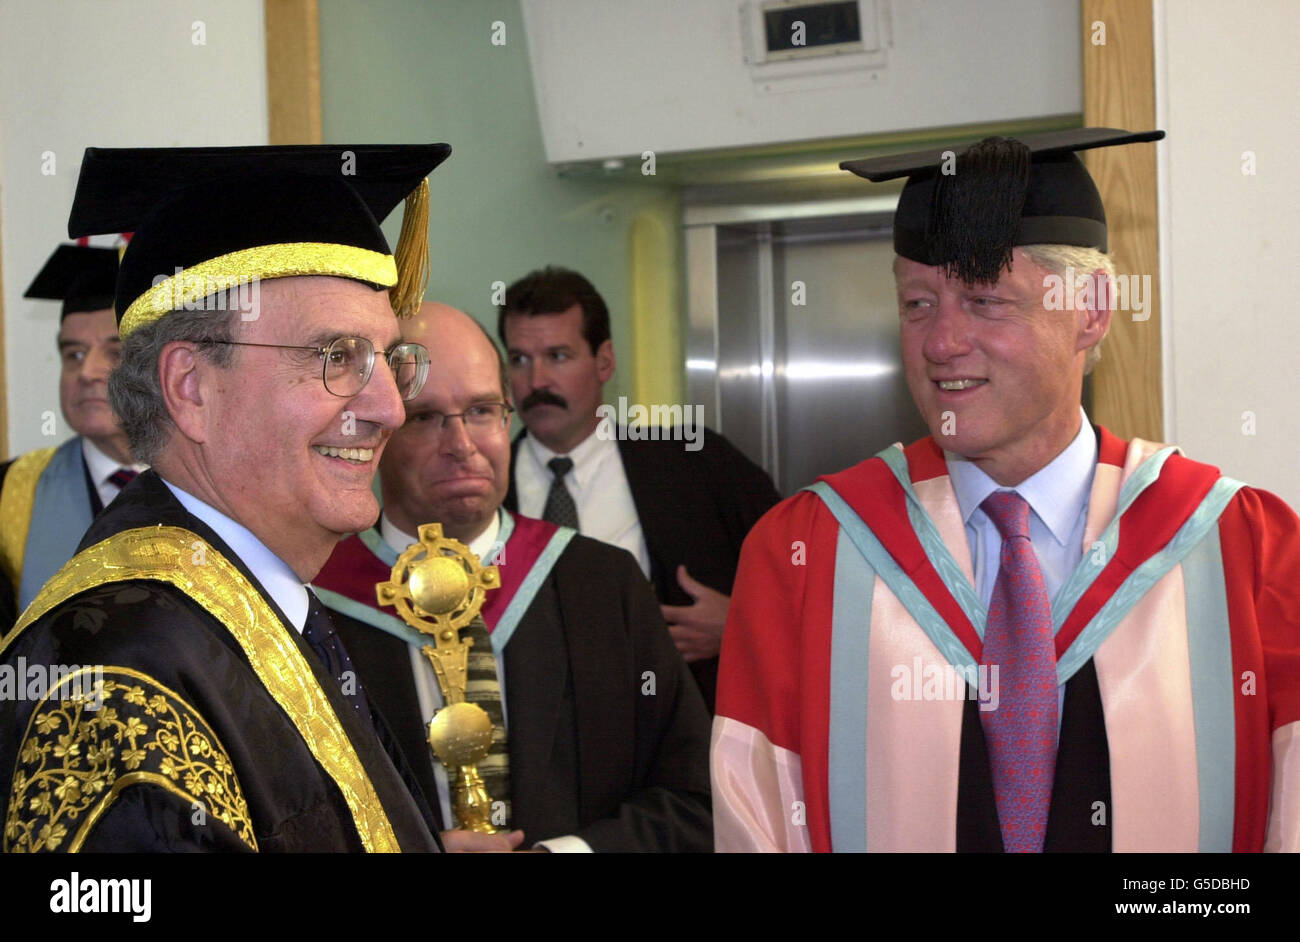 Former US President Bill Clinton and Senator George Mitchell, the Chancellor of Queen's University Belfast, Northern Ireland. Mr Clinton was awarded an honorary degree of Doctor of Laws for his contribution to the Northern Ireland peace process. *..., during a ceremony at the city's Waterfront Hall. Stock Photo